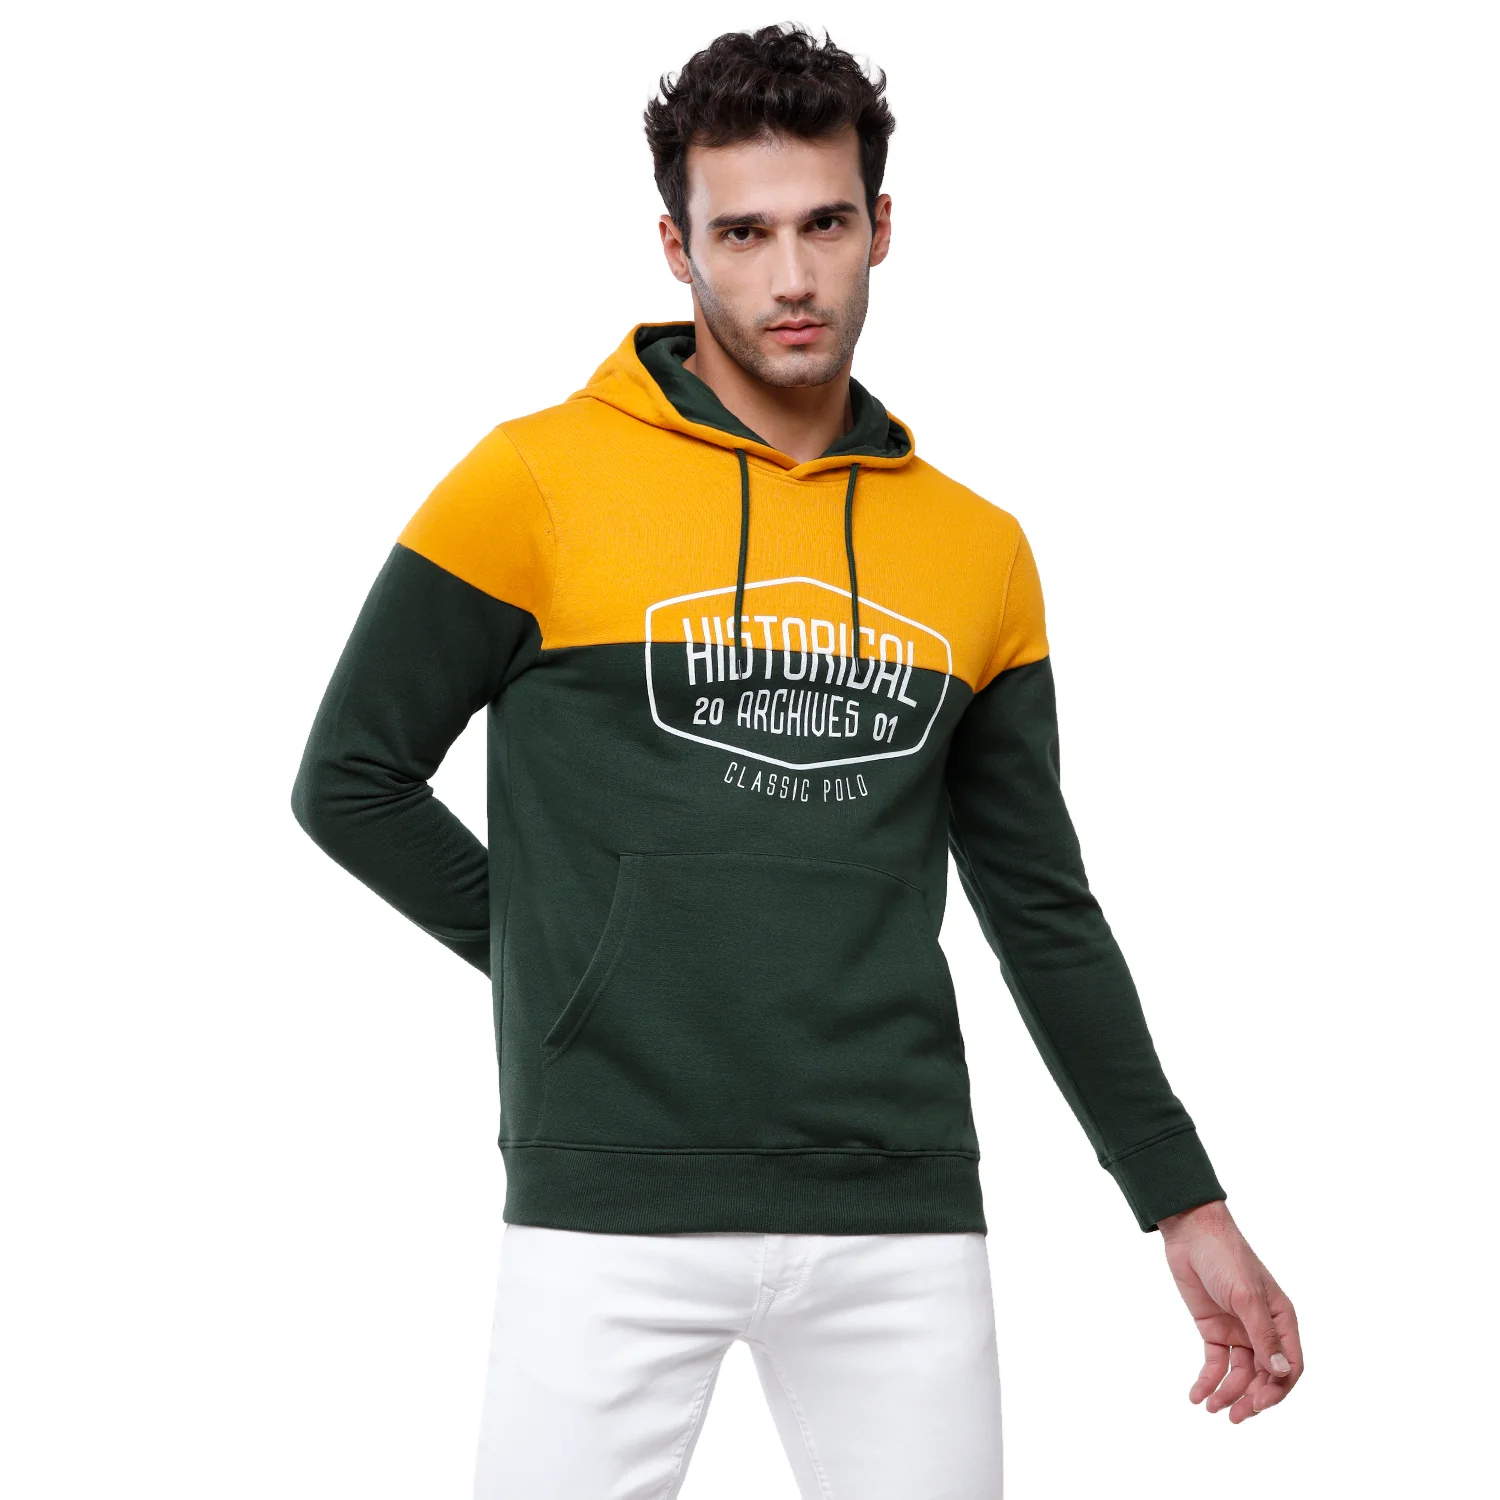 Classic Polo Men's Color Block Full Sleeve Yellow & Green Hooded Sweat Shirt - CPSS-335 A